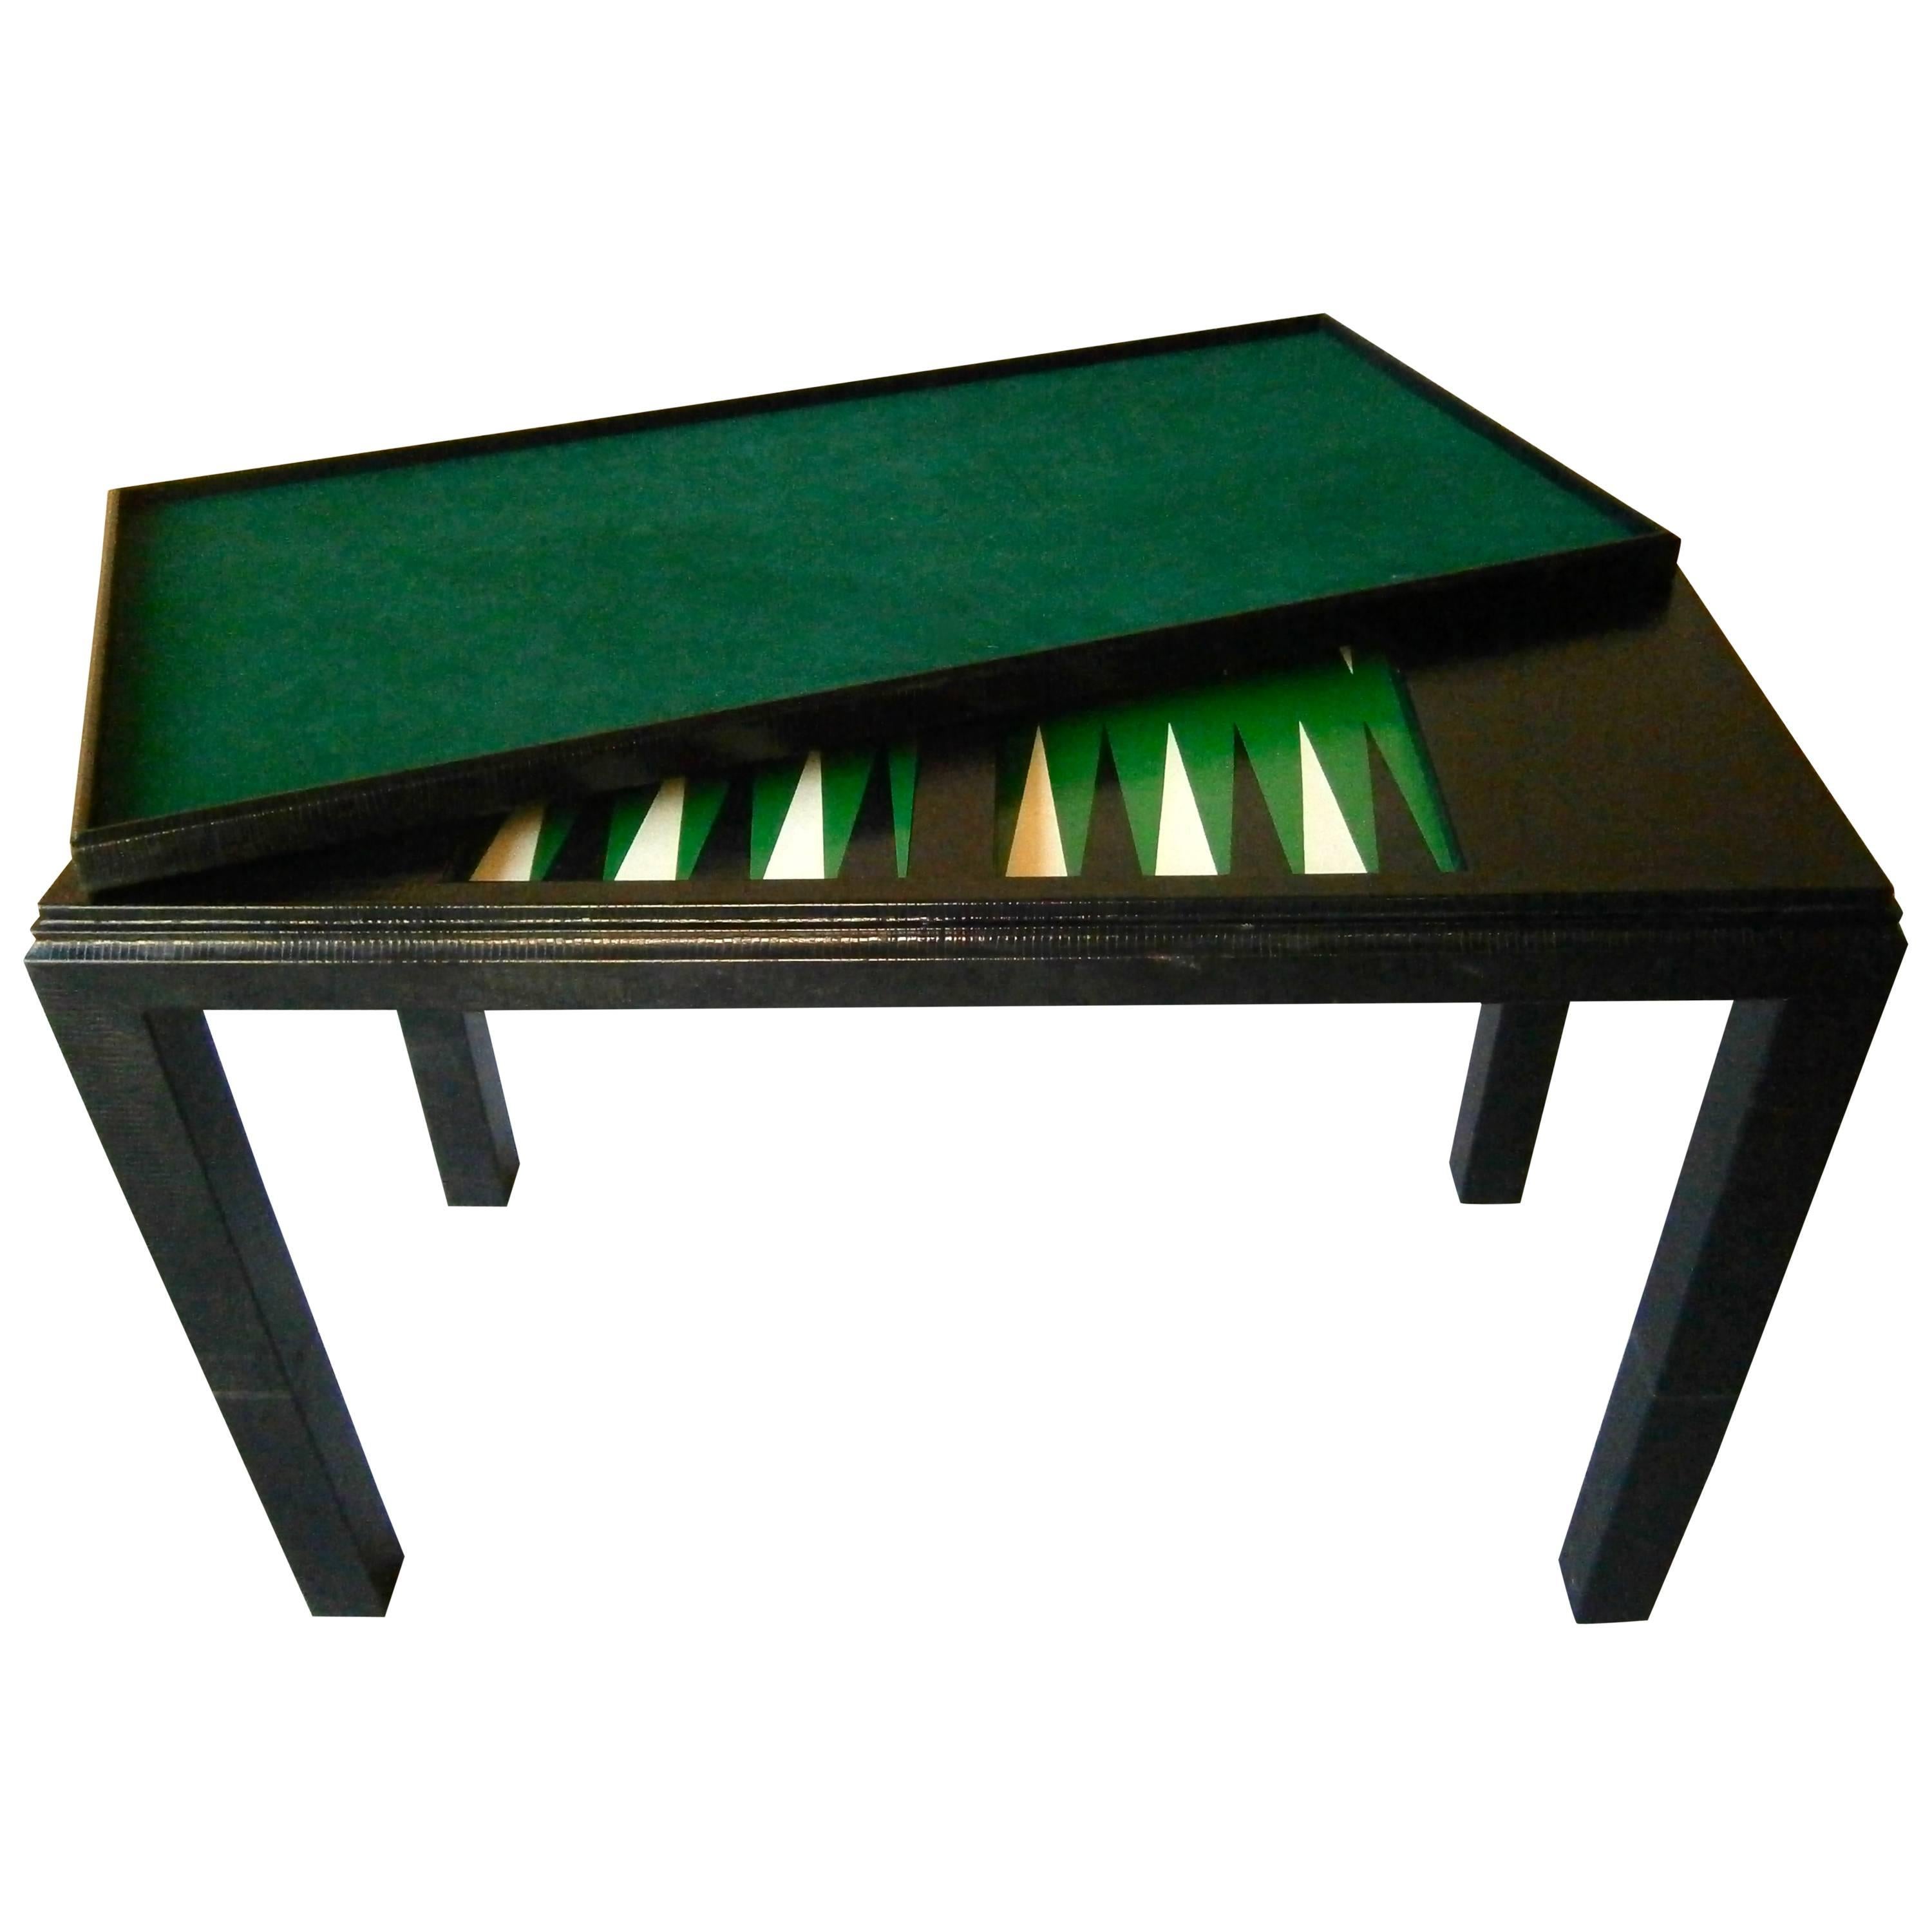 Chinese Parson Style Backgammon Table Designed by Karl Springer C. 1975